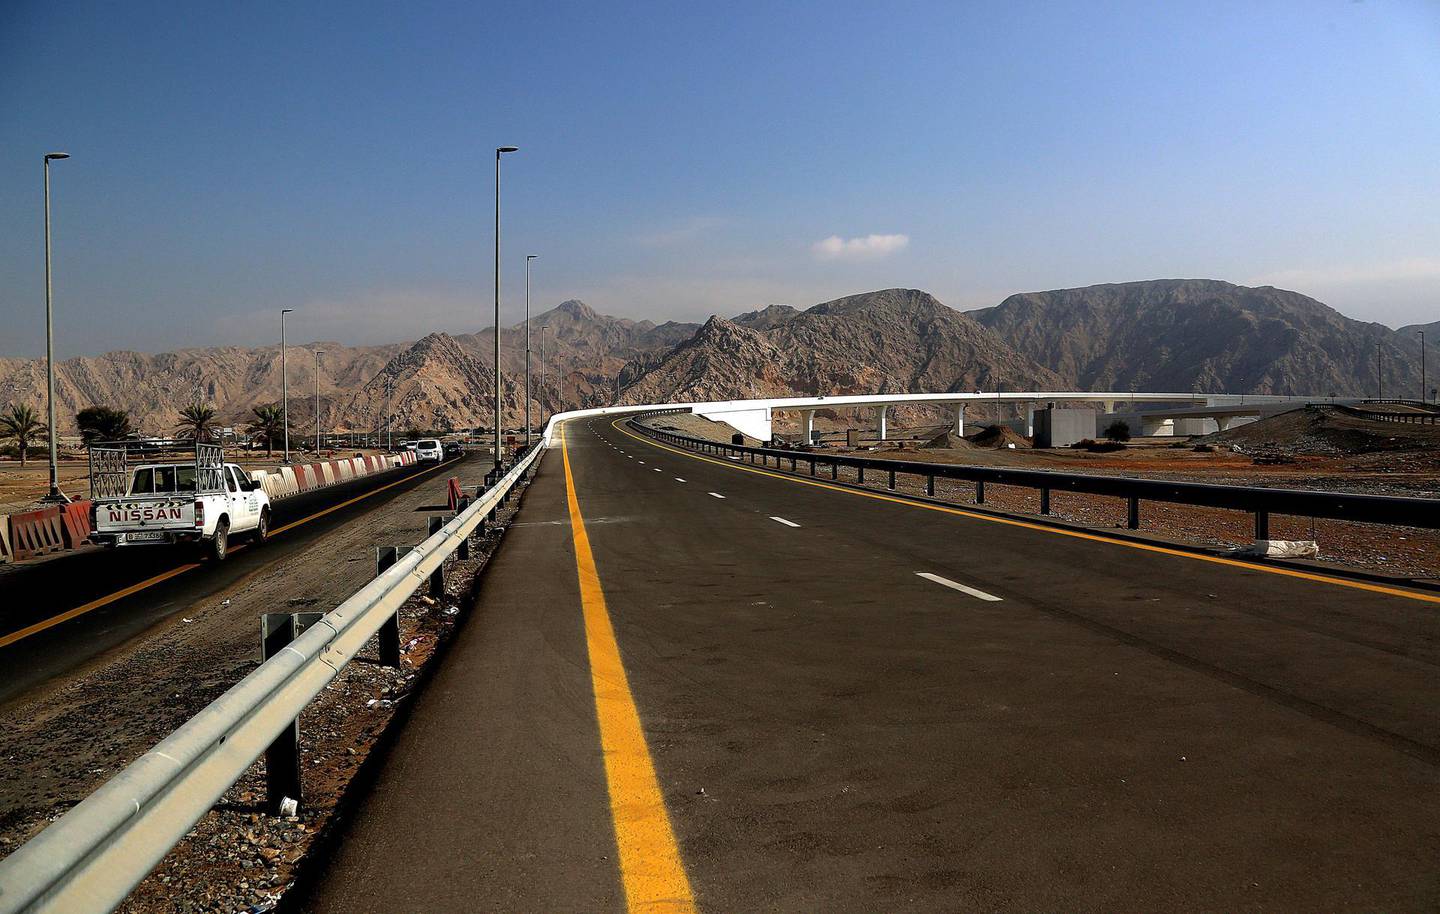 Ras Al Khaimah, Jan, 16, 2018: General view of the new ring road in Ras Al Khaimah. Satish Kumar for the National / Story by Anna Zacharias